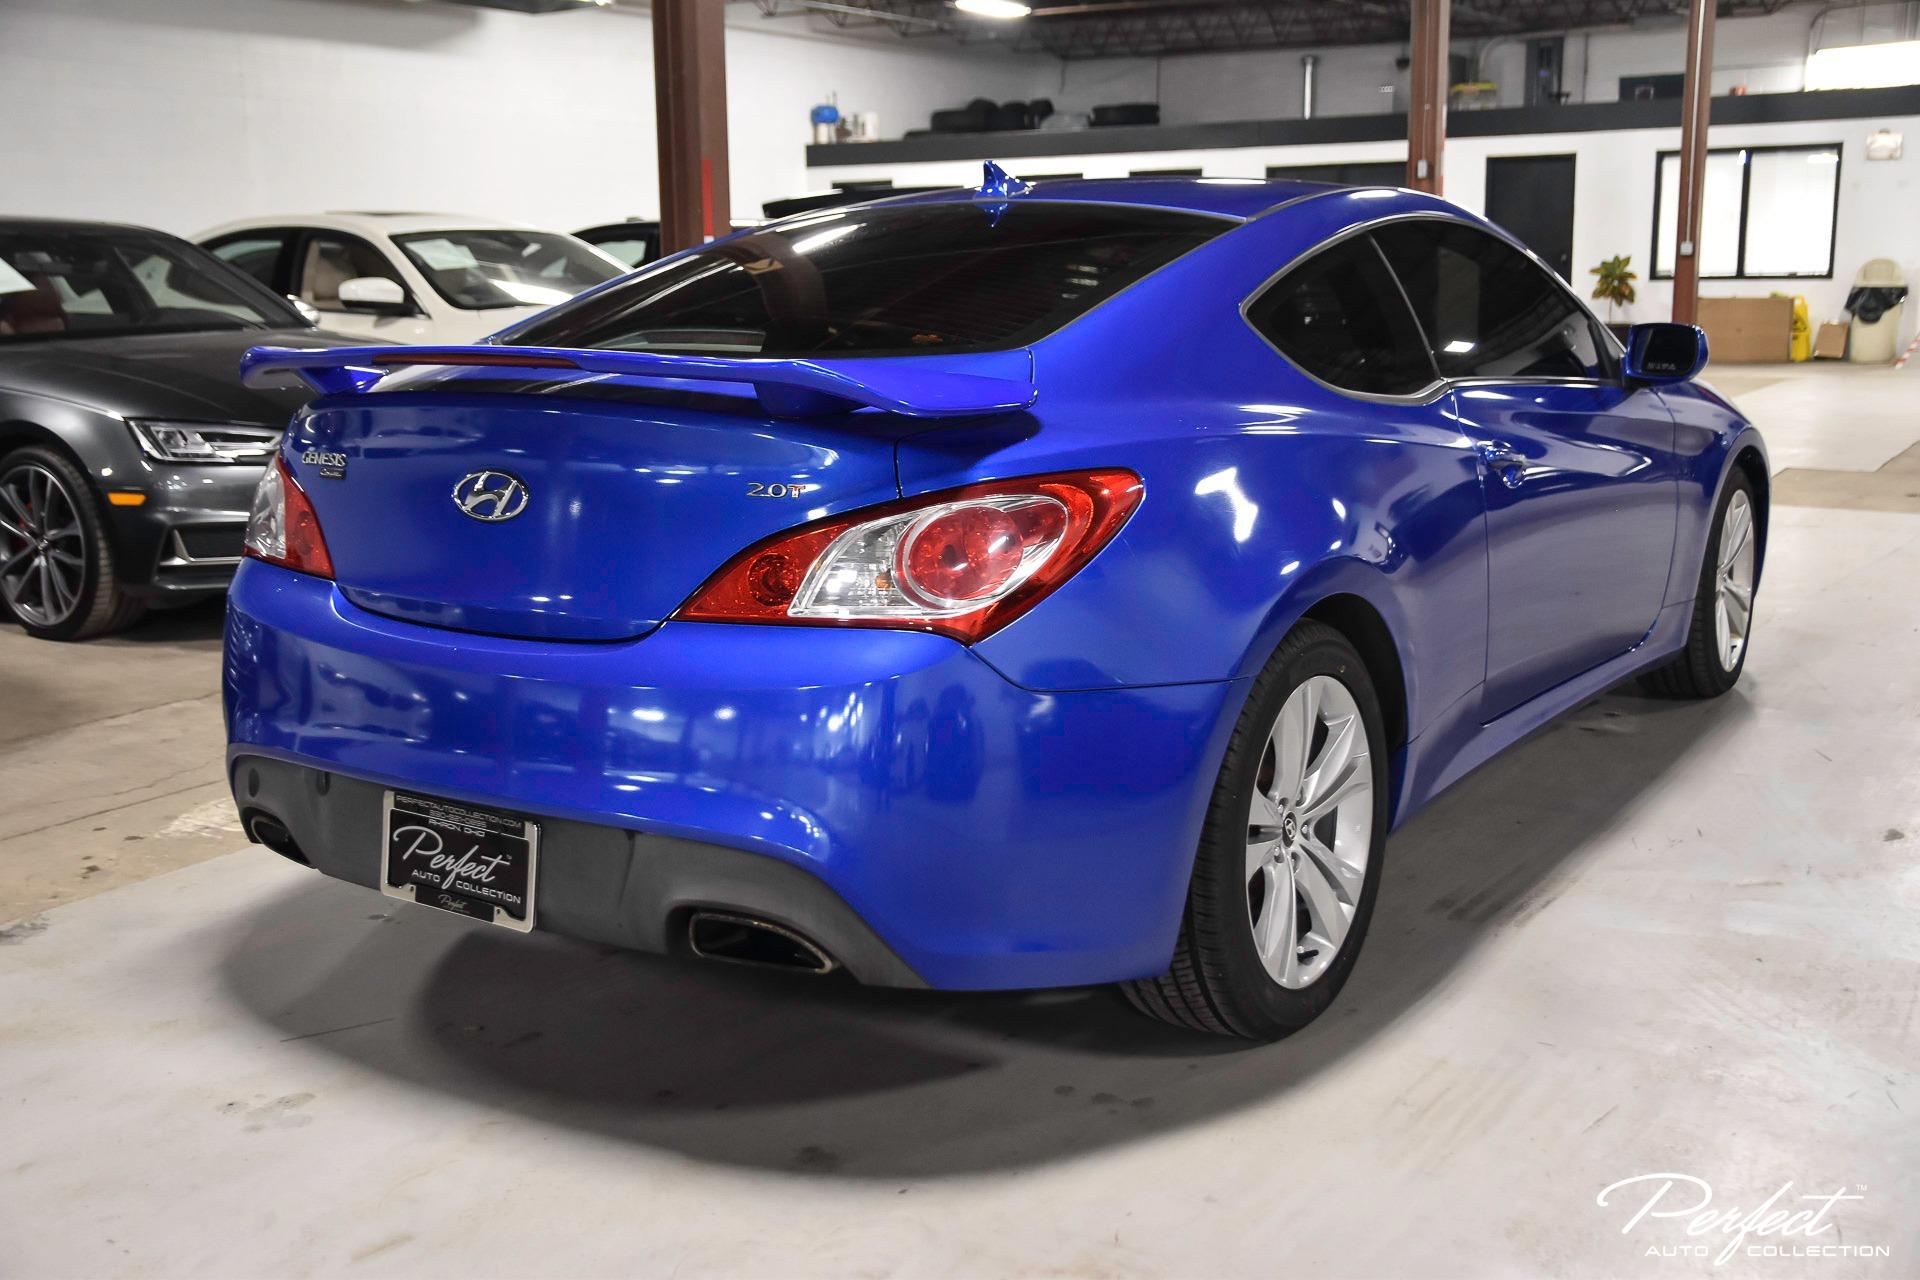 used-2012-hyundai-genesis-coupe-2-0t-for-sale-10-995-perfect-auto